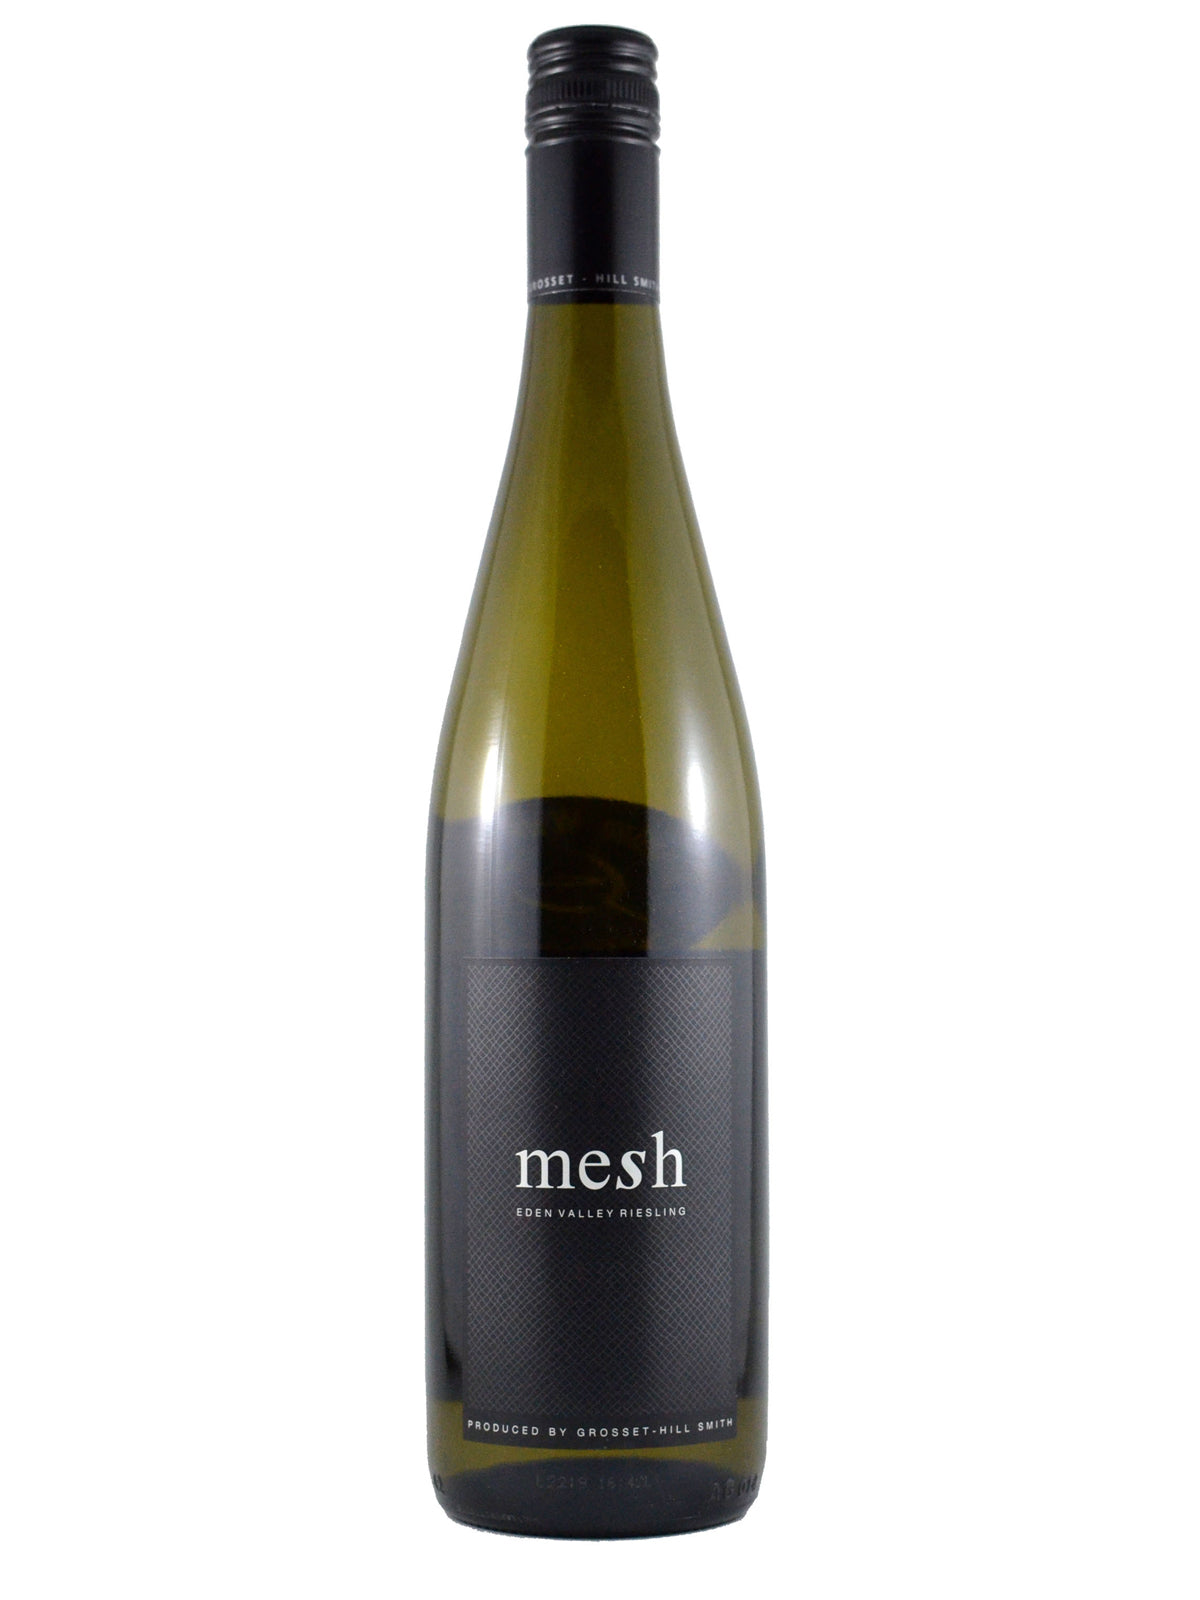 Grosset-Hill Smith, Mesh, Riesling